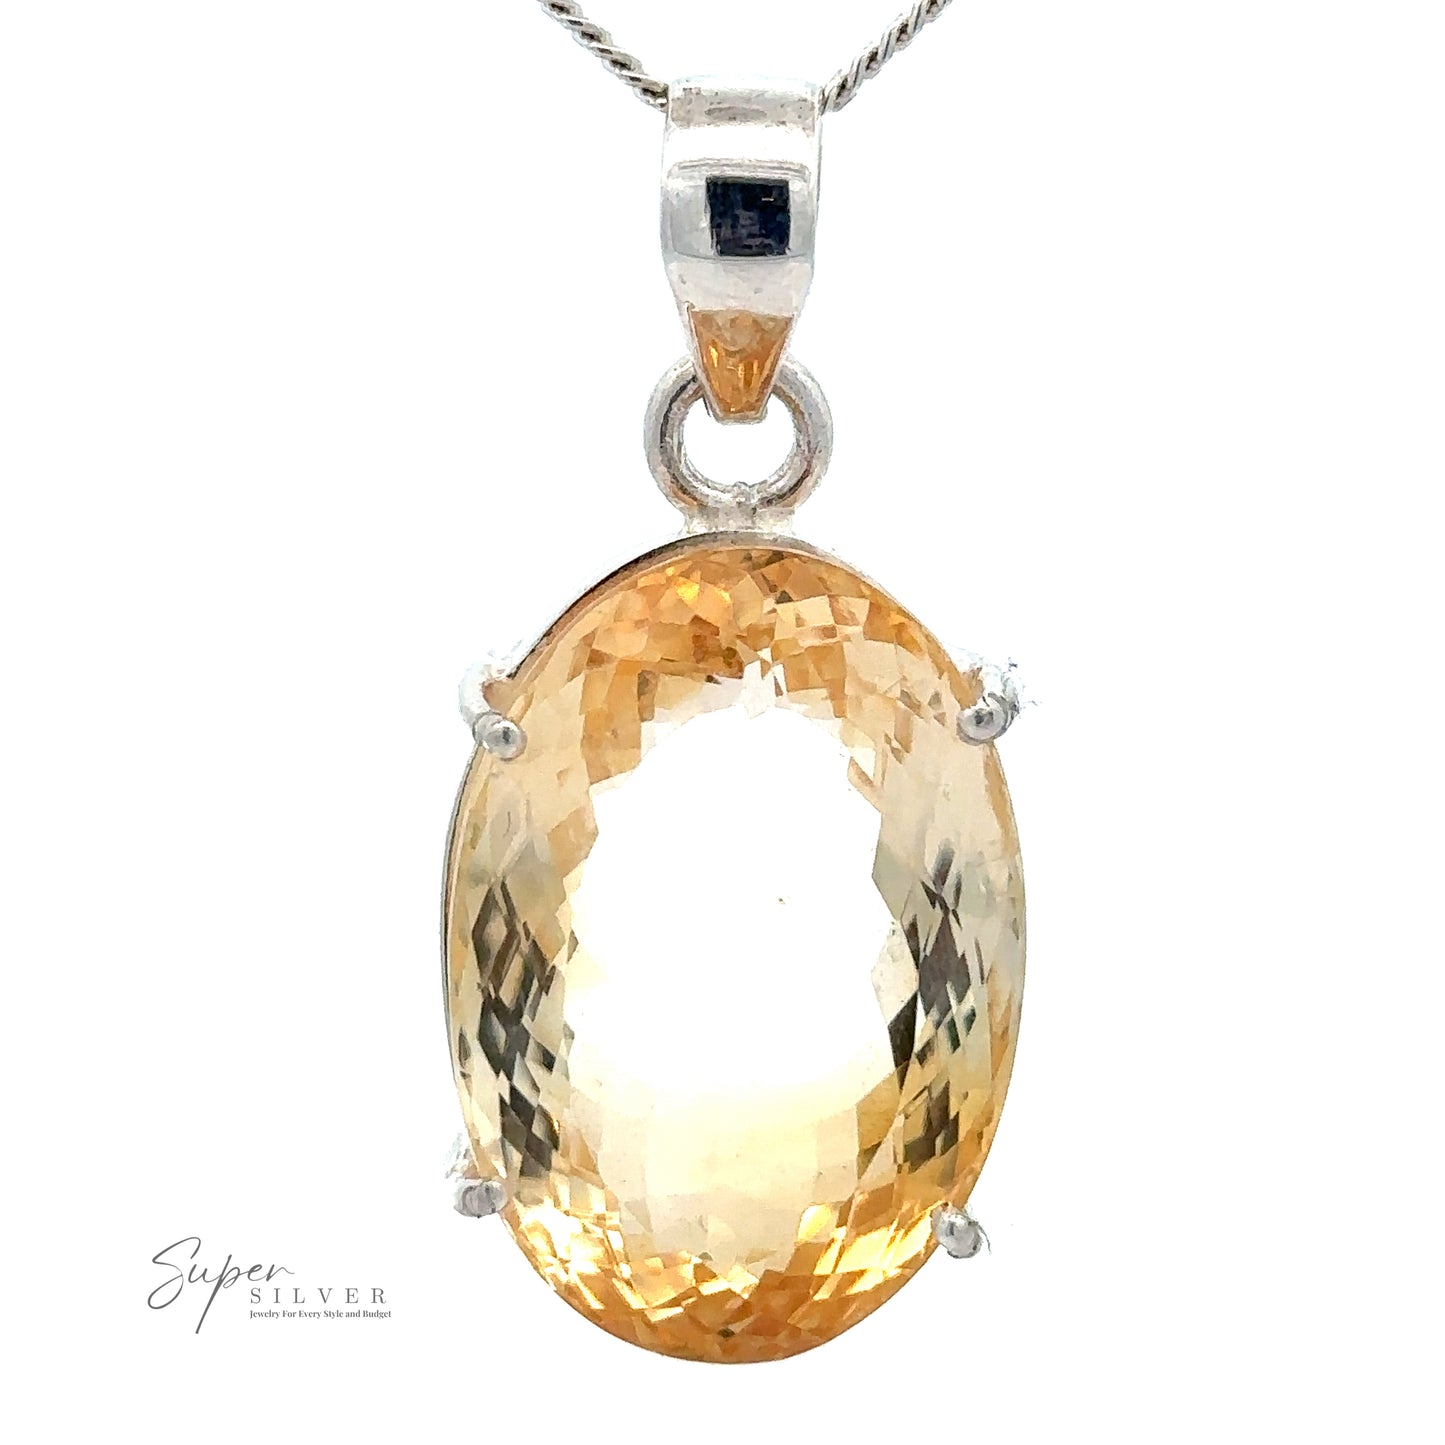 A Brilliant Pronged Citrine Pendant with an oval-shaped, light amber gemstone set in sterling silver, attached to a silver chain. The faceted cut gemstone adds extra sparkle, and the pendant has a small engraved "Super Silver" logo on the bottom left.